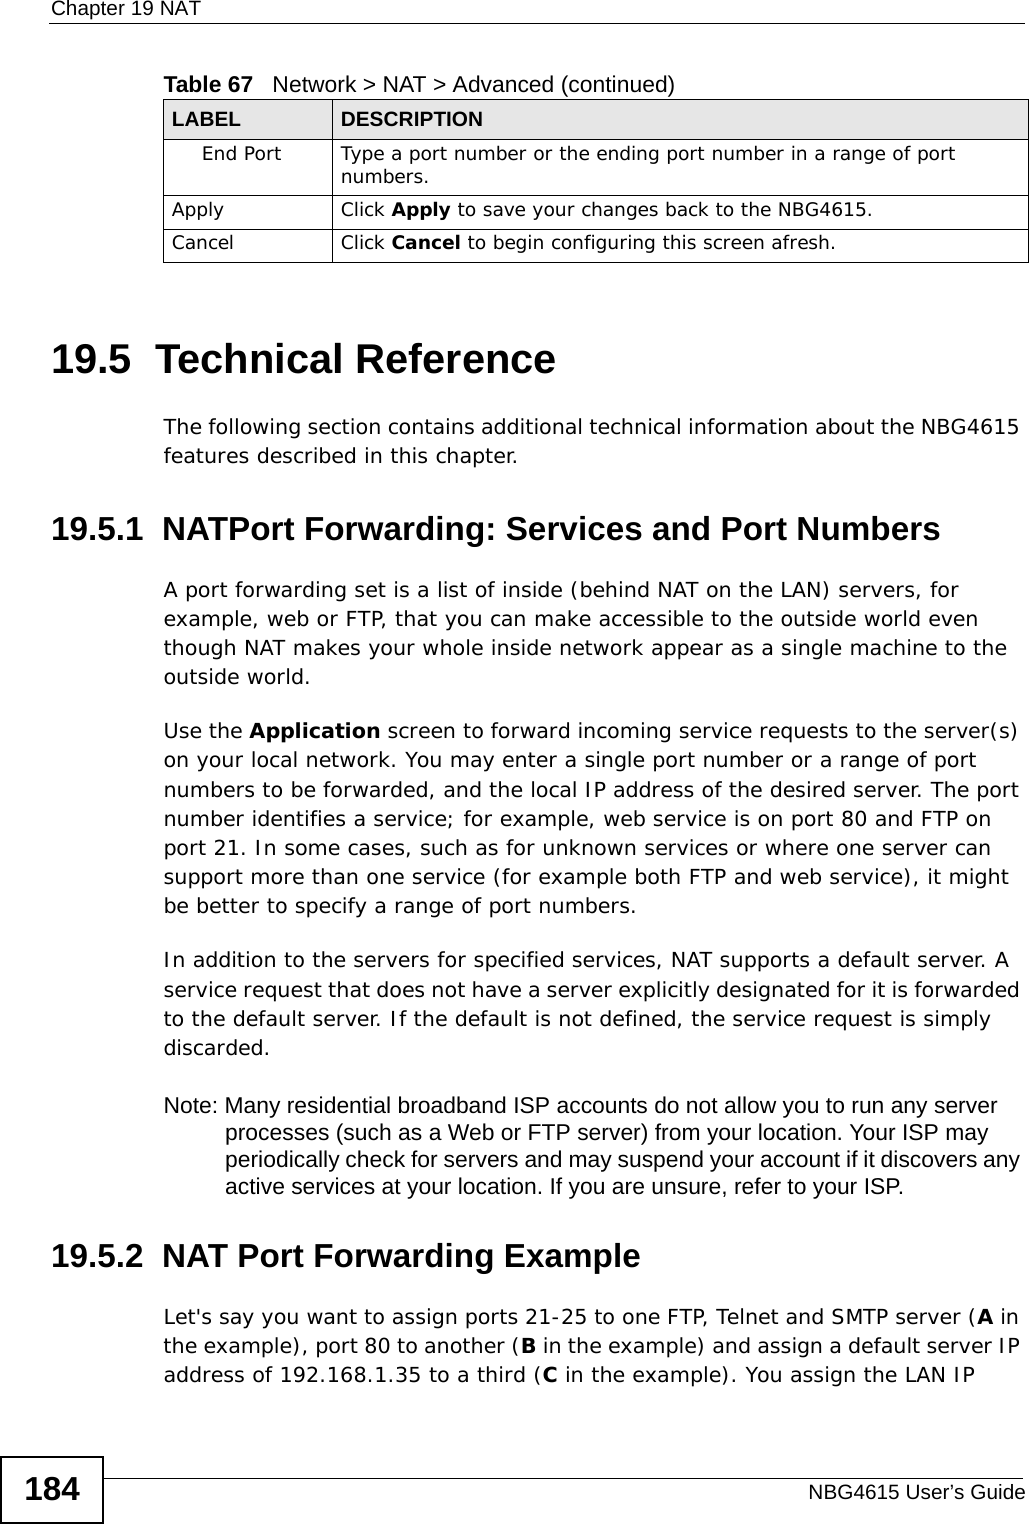 Chapter 19 NATNBG4615 User’s Guide18419.5  Technical ReferenceThe following section contains additional technical information about the NBG4615 features described in this chapter.19.5.1  NATPort Forwarding: Services and Port NumbersA port forwarding set is a list of inside (behind NAT on the LAN) servers, for example, web or FTP, that you can make accessible to the outside world even though NAT makes your whole inside network appear as a single machine to the outside world. Use the Application screen to forward incoming service requests to the server(s) on your local network. You may enter a single port number or a range of port numbers to be forwarded, and the local IP address of the desired server. The port number identifies a service; for example, web service is on port 80 and FTP on port 21. In some cases, such as for unknown services or where one server can support more than one service (for example both FTP and web service), it might be better to specify a range of port numbers.In addition to the servers for specified services, NAT supports a default server. A service request that does not have a server explicitly designated for it is forwarded to the default server. If the default is not defined, the service request is simply discarded.Note: Many residential broadband ISP accounts do not allow you to run any server processes (such as a Web or FTP server) from your location. Your ISP may periodically check for servers and may suspend your account if it discovers any active services at your location. If you are unsure, refer to your ISP.19.5.2  NAT Port Forwarding ExampleLet&apos;s say you want to assign ports 21-25 to one FTP, Telnet and SMTP server (A in the example), port 80 to another (B in the example) and assign a default server IP address of 192.168.1.35 to a third (C in the example). You assign the LAN IP End Port Type a port number or the ending port number in a range of port numbers.Apply Click Apply to save your changes back to the NBG4615.Cancel Click Cancel to begin configuring this screen afresh.Table 67   Network &gt; NAT &gt; Advanced (continued)LABEL DESCRIPTION